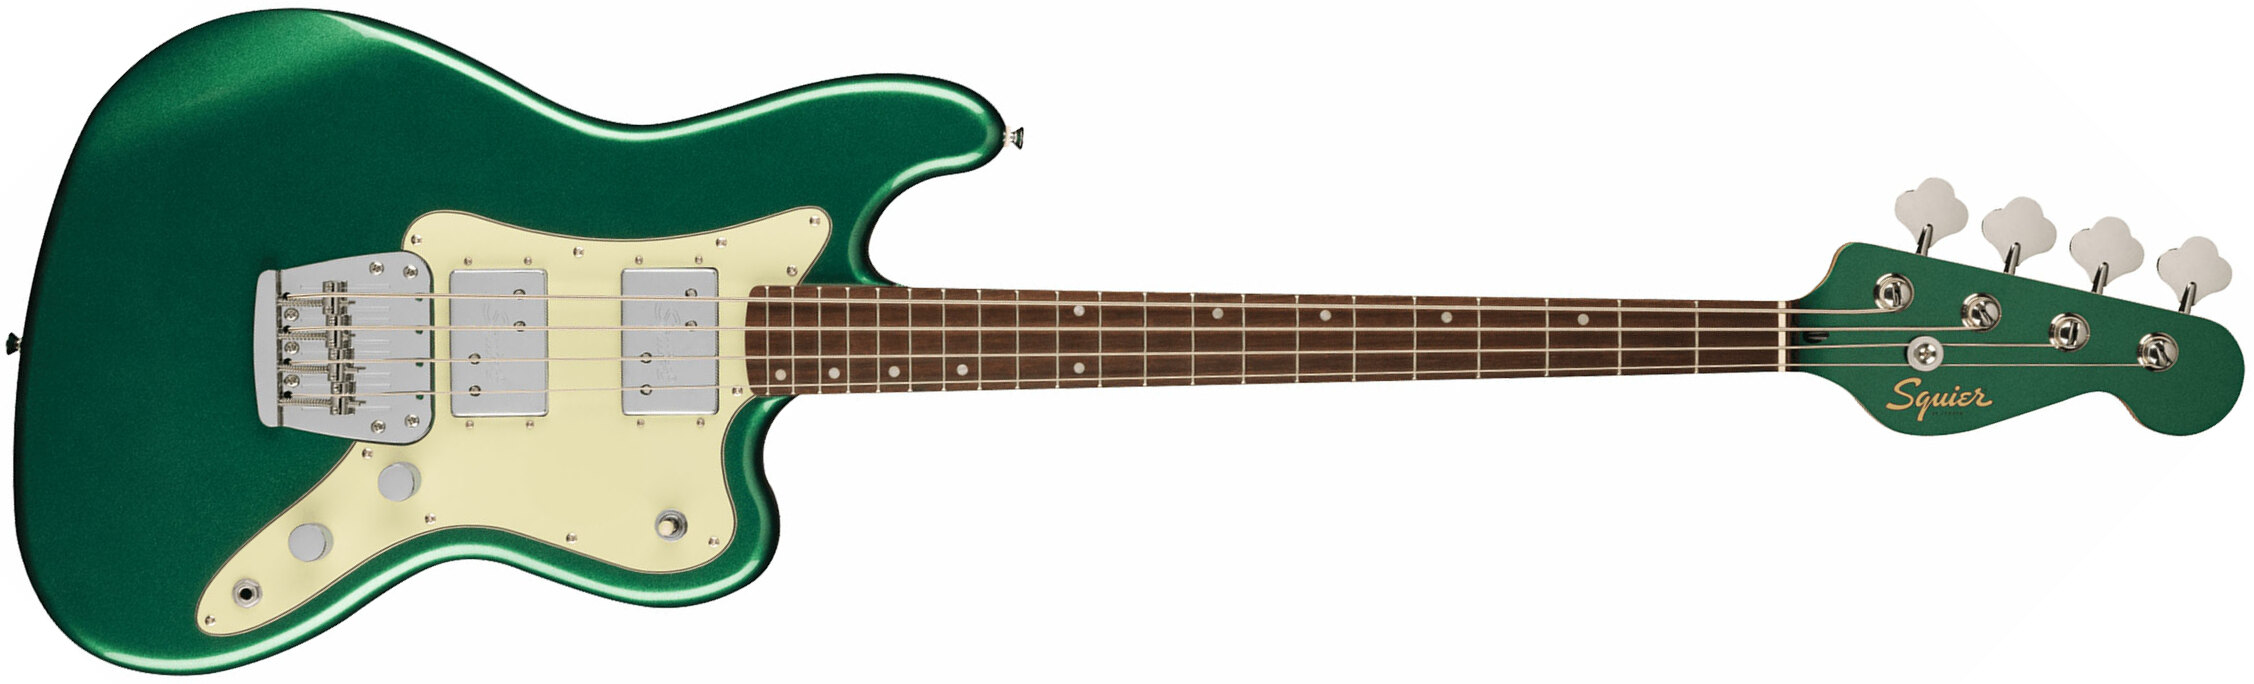 Squier Rascal Bass Hh Paranormal 2h Lau - Sherwood Green - Solid body elektrische bas - Main picture